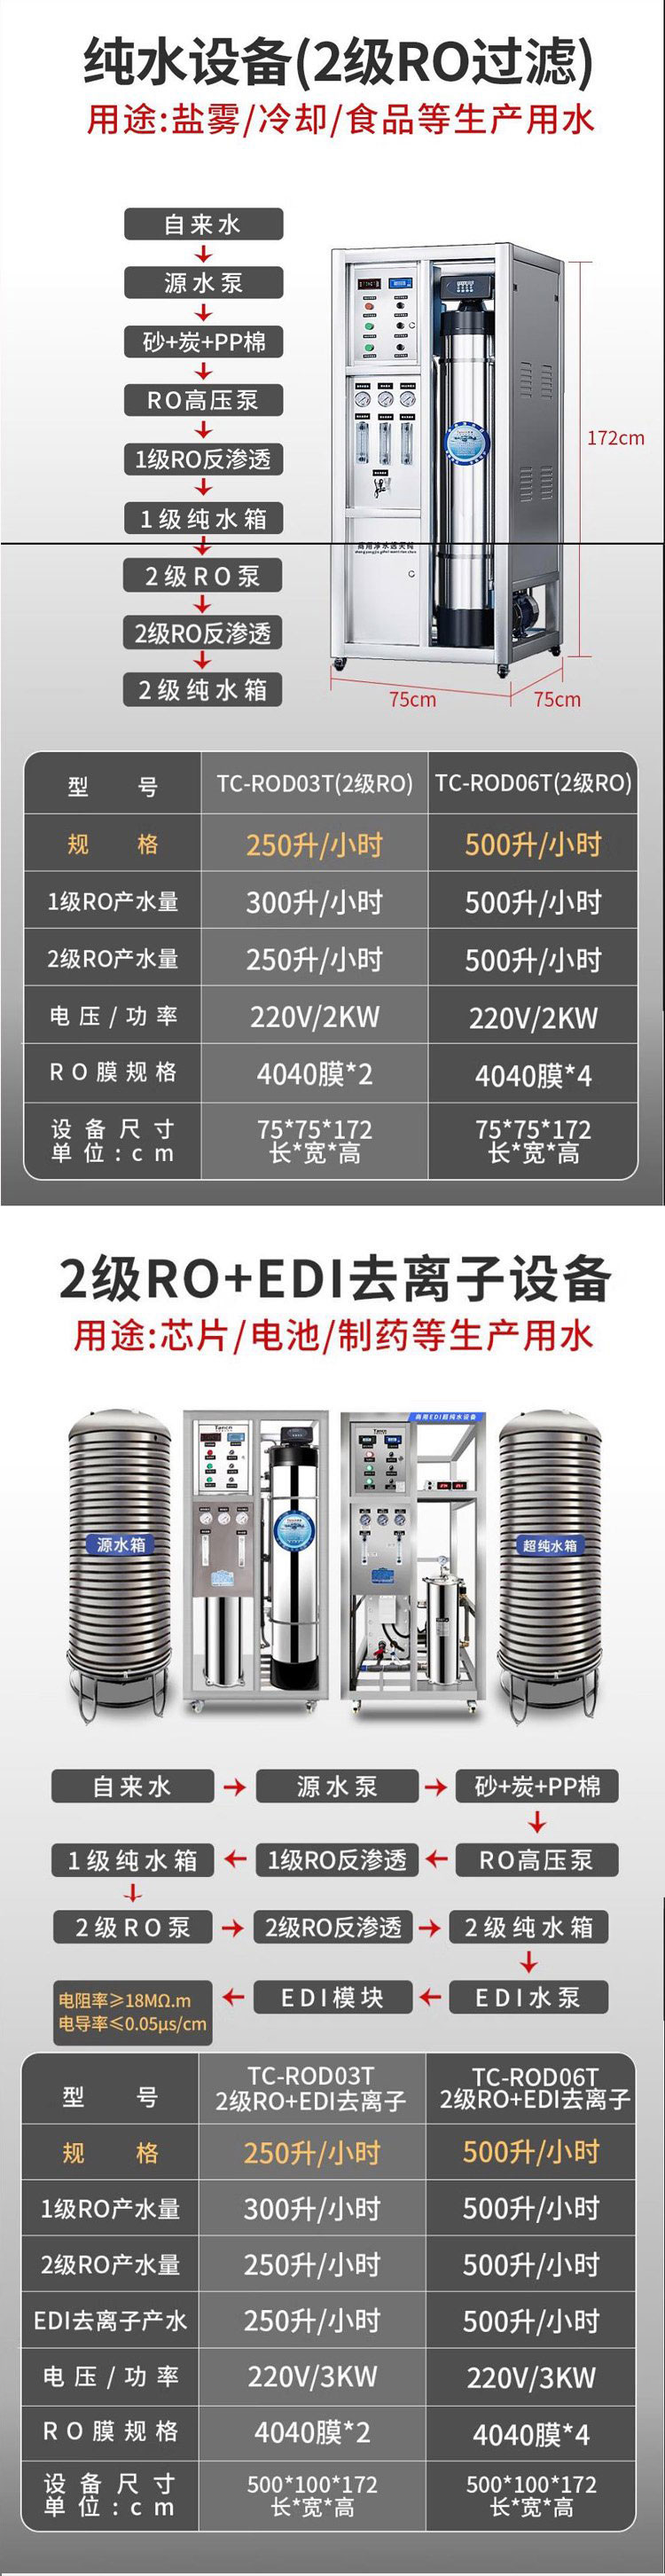 Tianchun School Constant Temperature Direct Drinking Machine Business Factory Direct Drinking Boiling Machine Water dispenser